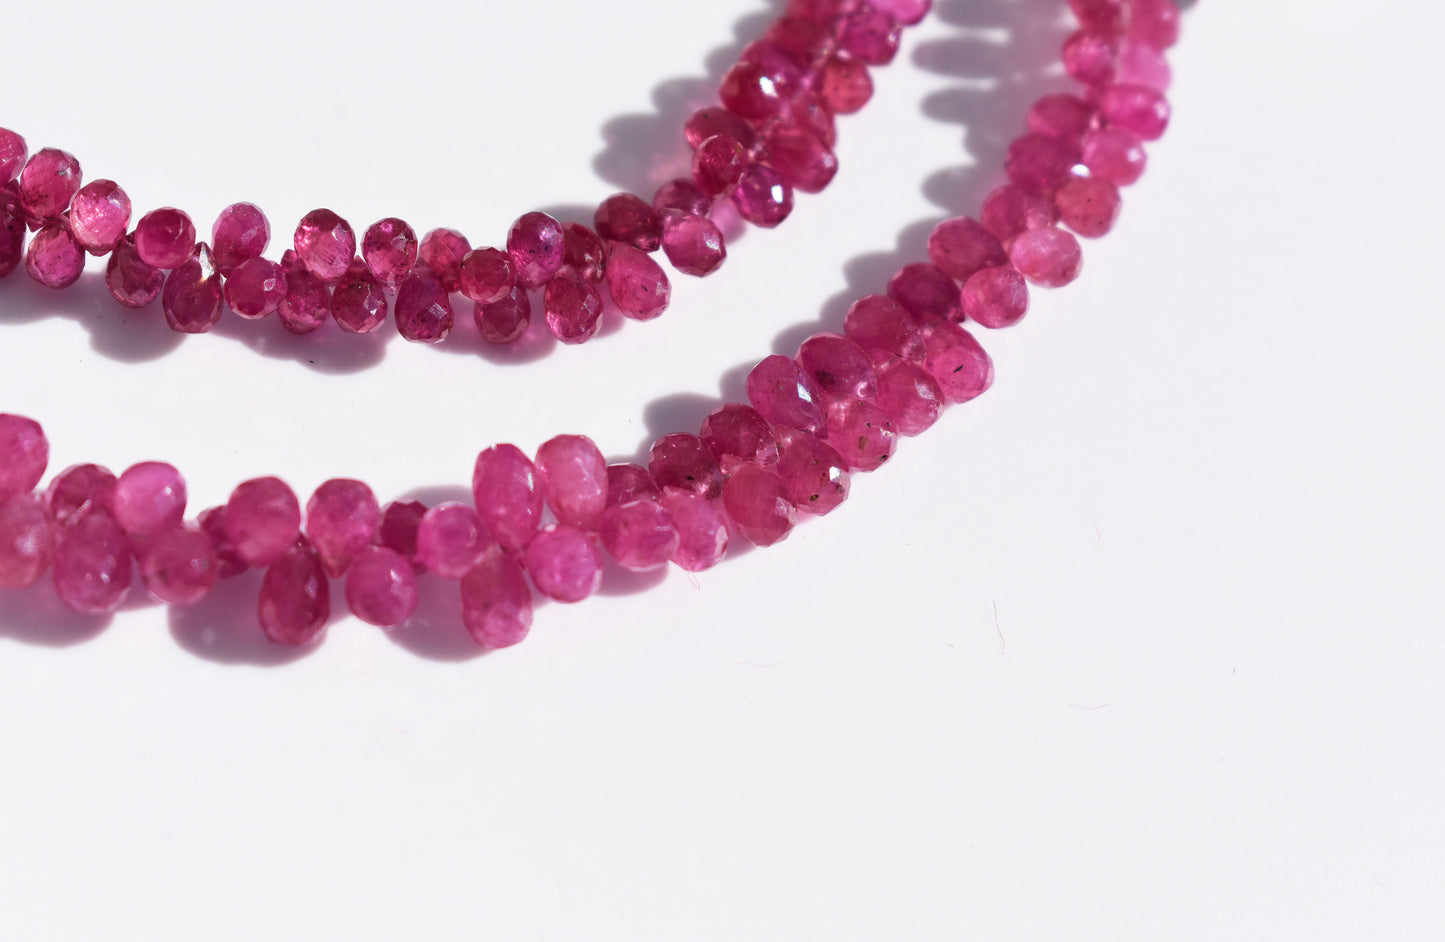 Ruby Briolette Beads - Graduated Drop Beads 2.25-3mm